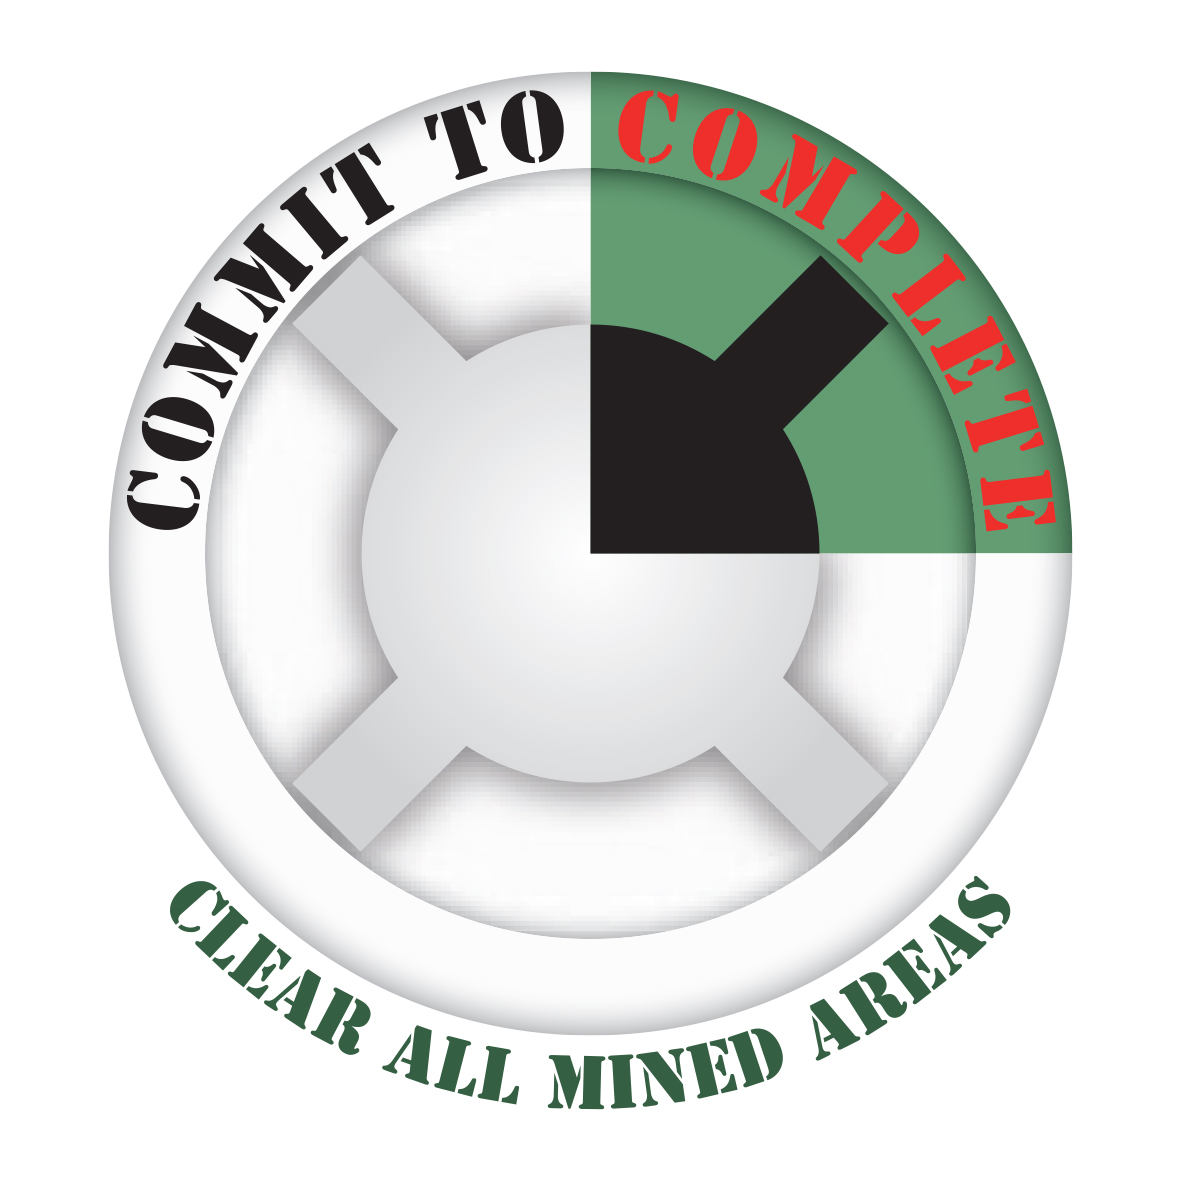 clear all mined areas